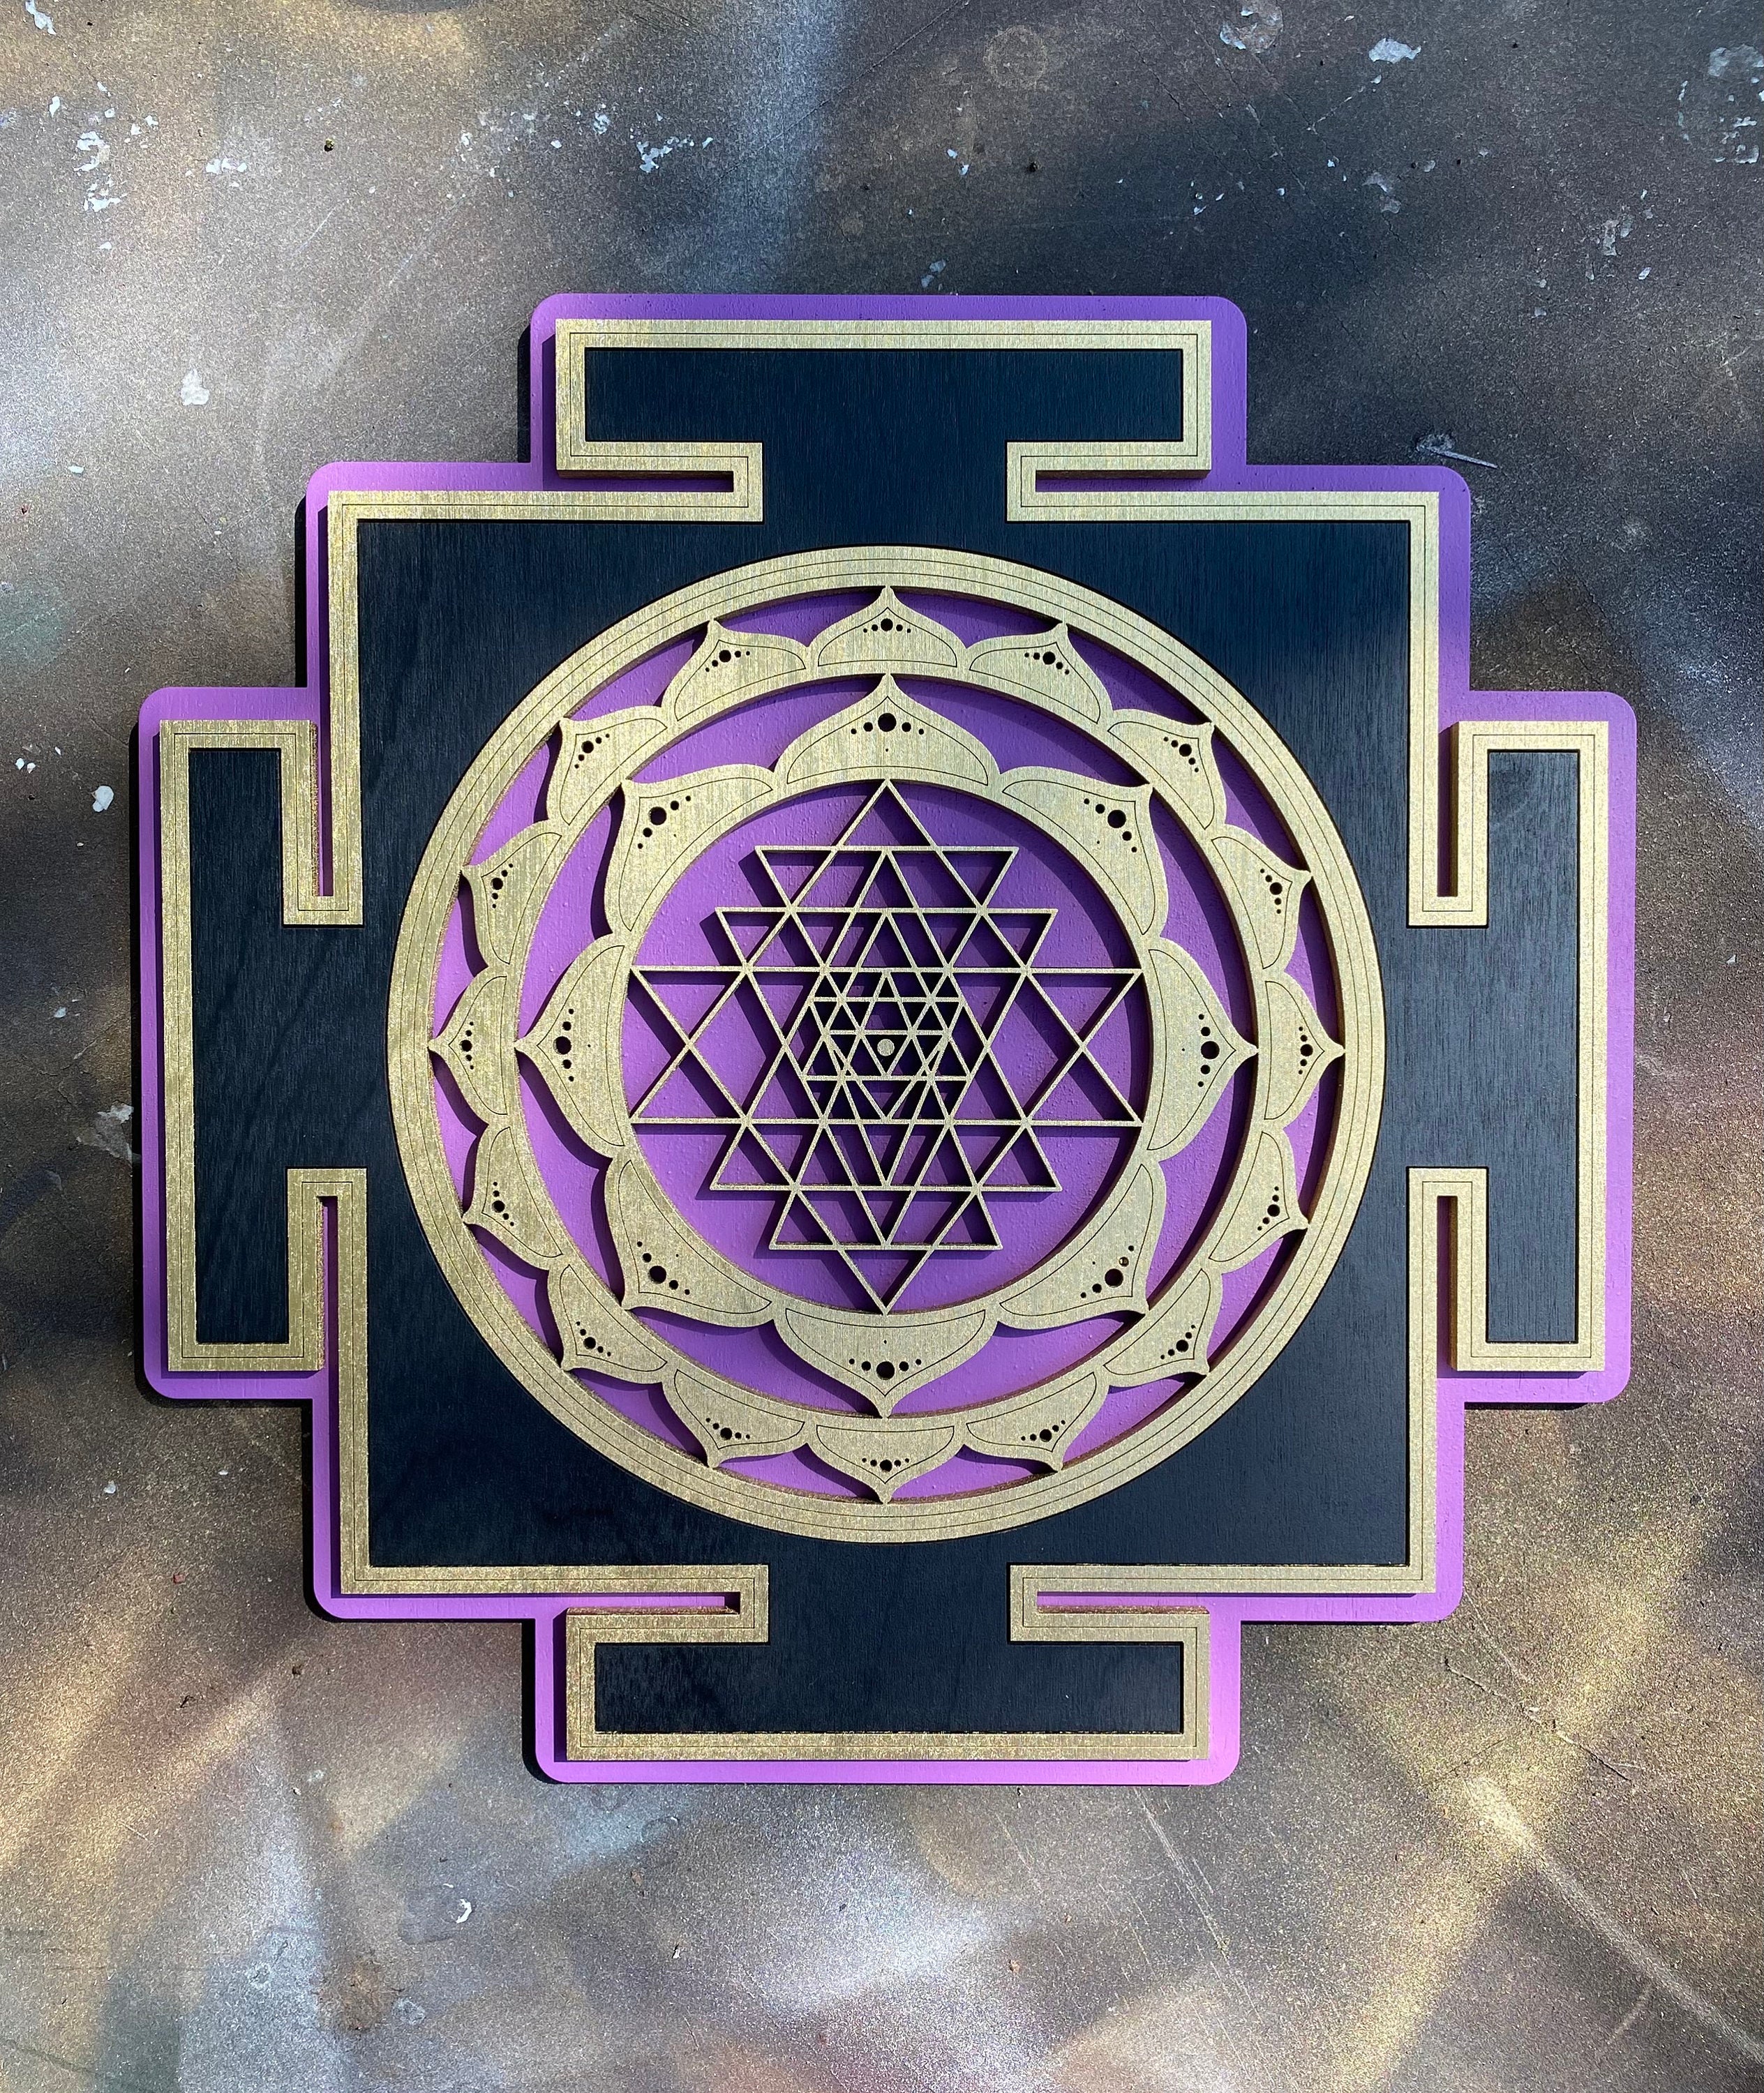 Shree sampoorn kuber laxmi yantra- for Pooja Health, Wealth, Prosperity  ,Money and Success Suitable for home temples, shops, offices, clinics etc